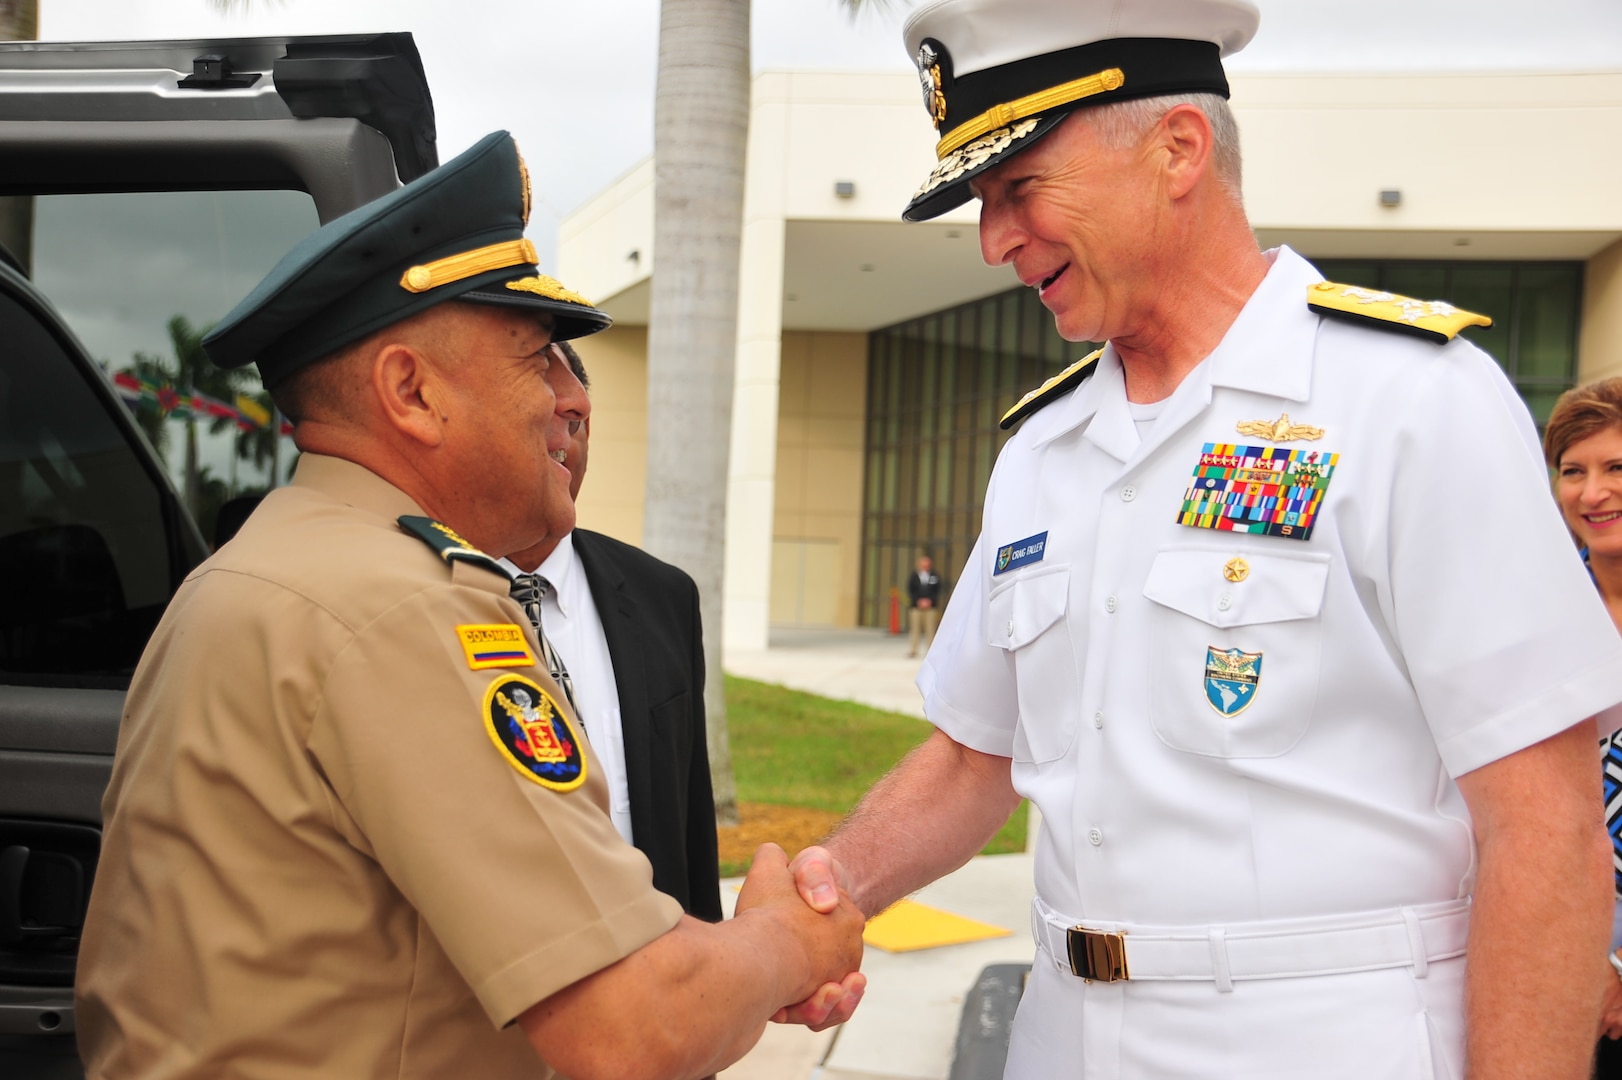 U.S. Navy Adm. Craig Faller, commander of U.S. Southern Command, welcomes Colombian Army Maj. Gen. Luis Navarro Jiménez, Commanding General of the Colombian Military Forces, to SOUTHCOM headquarters.